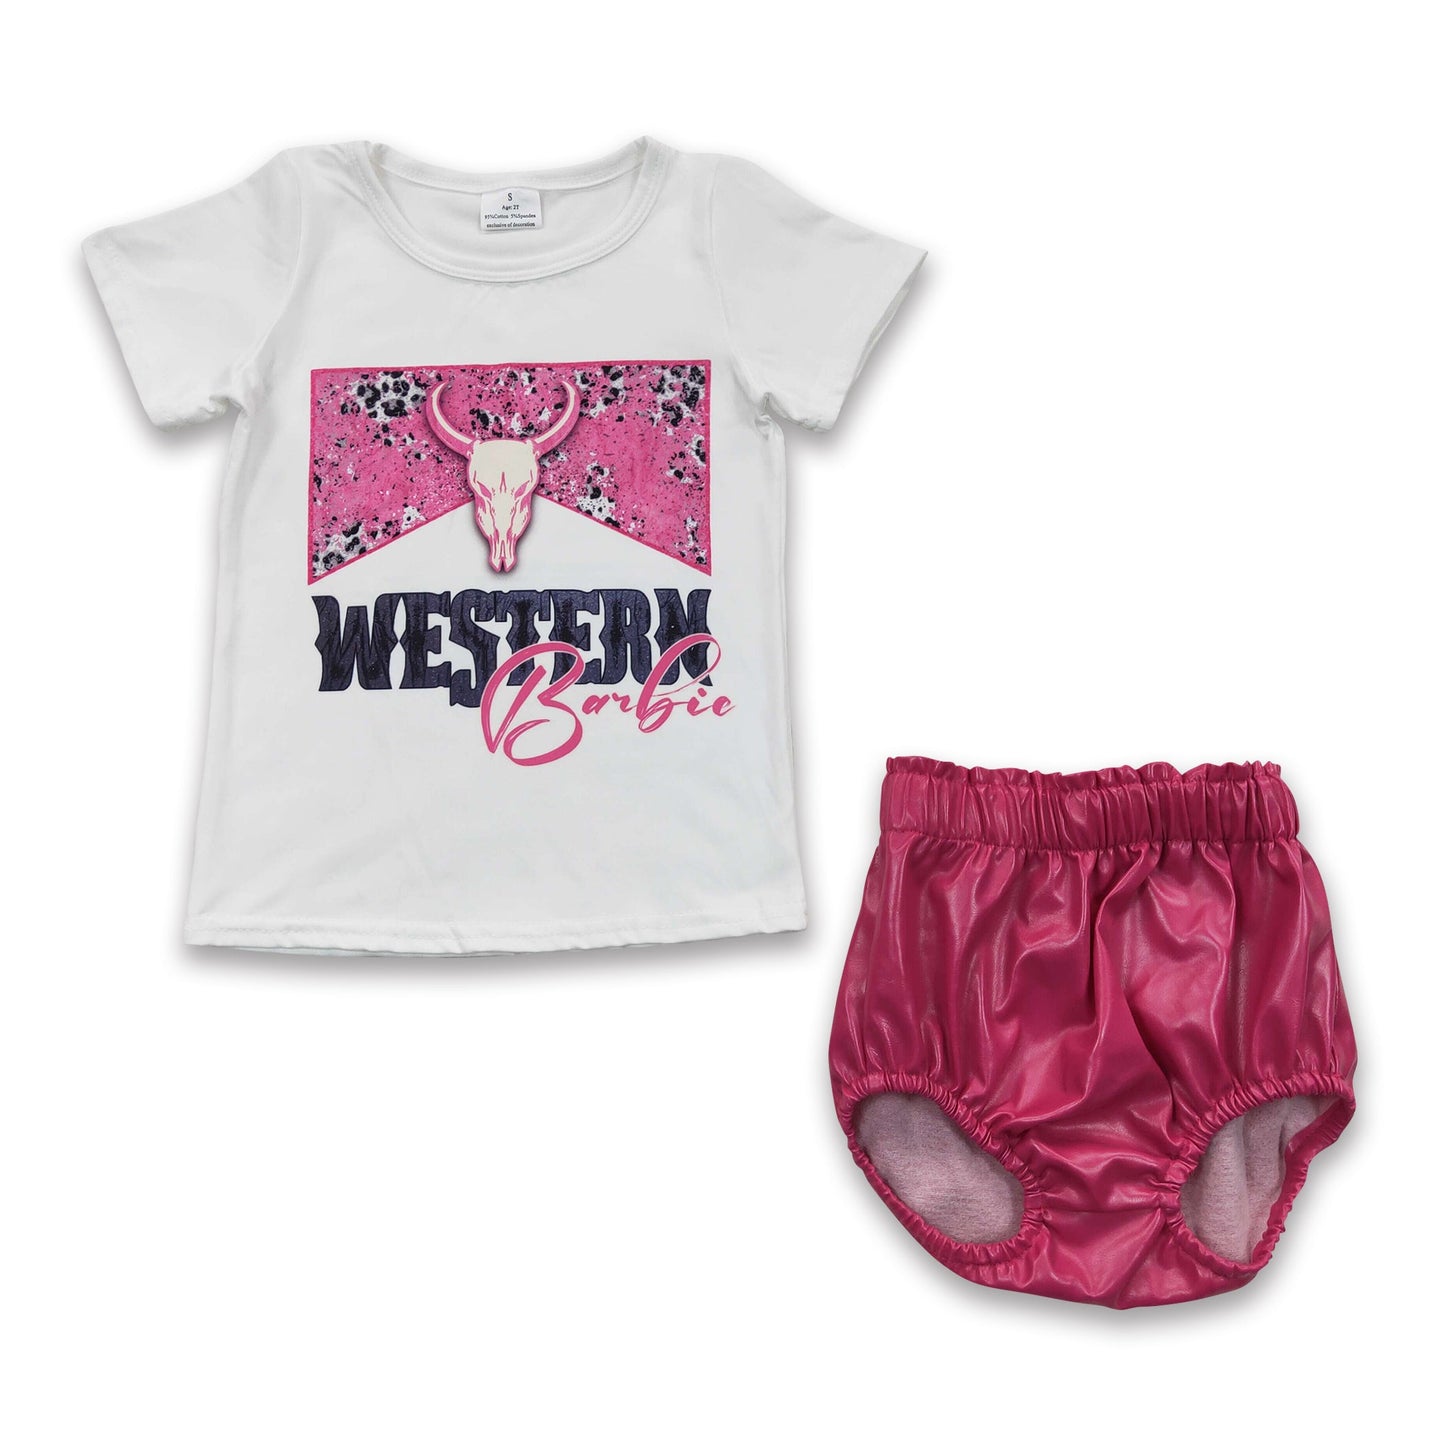 Western shirt hot pink leather bummies party girls outfits